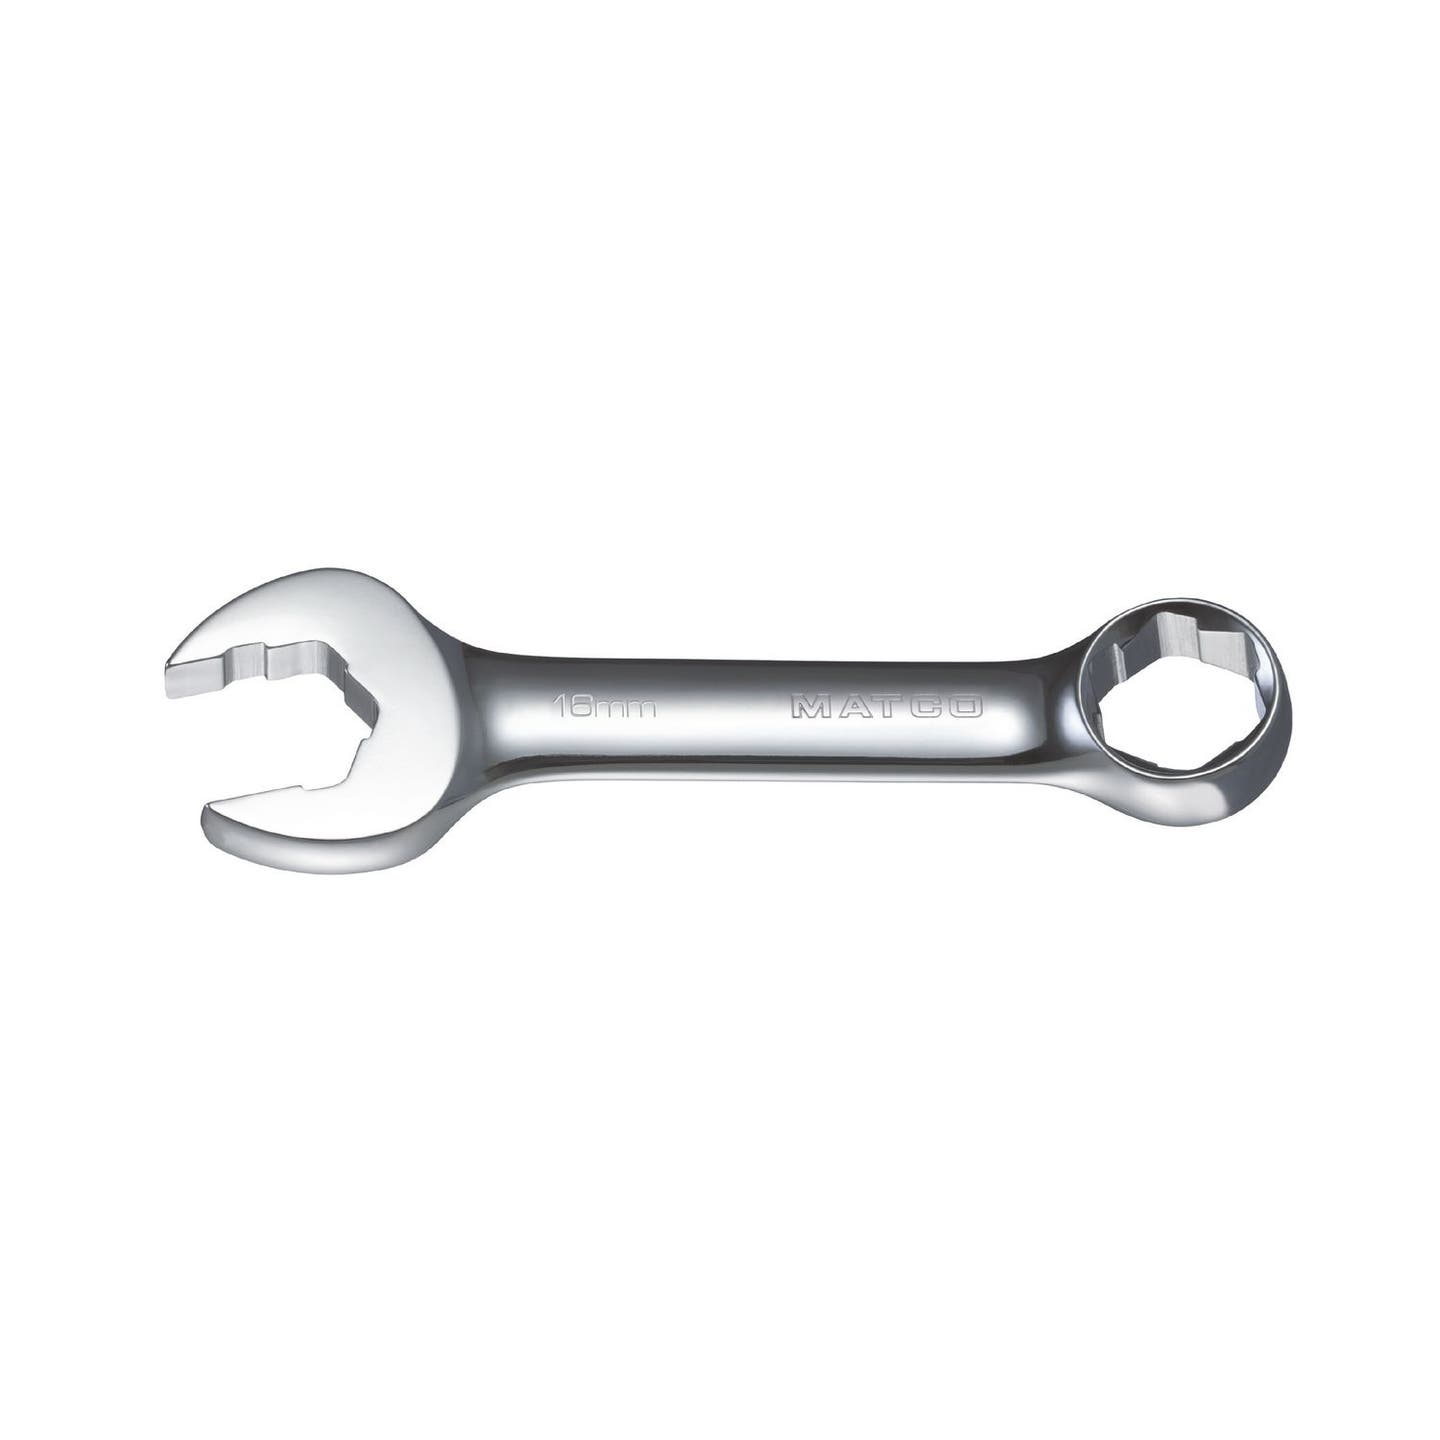 16MM STUBBY METRIC HEX GRIP WRENCH